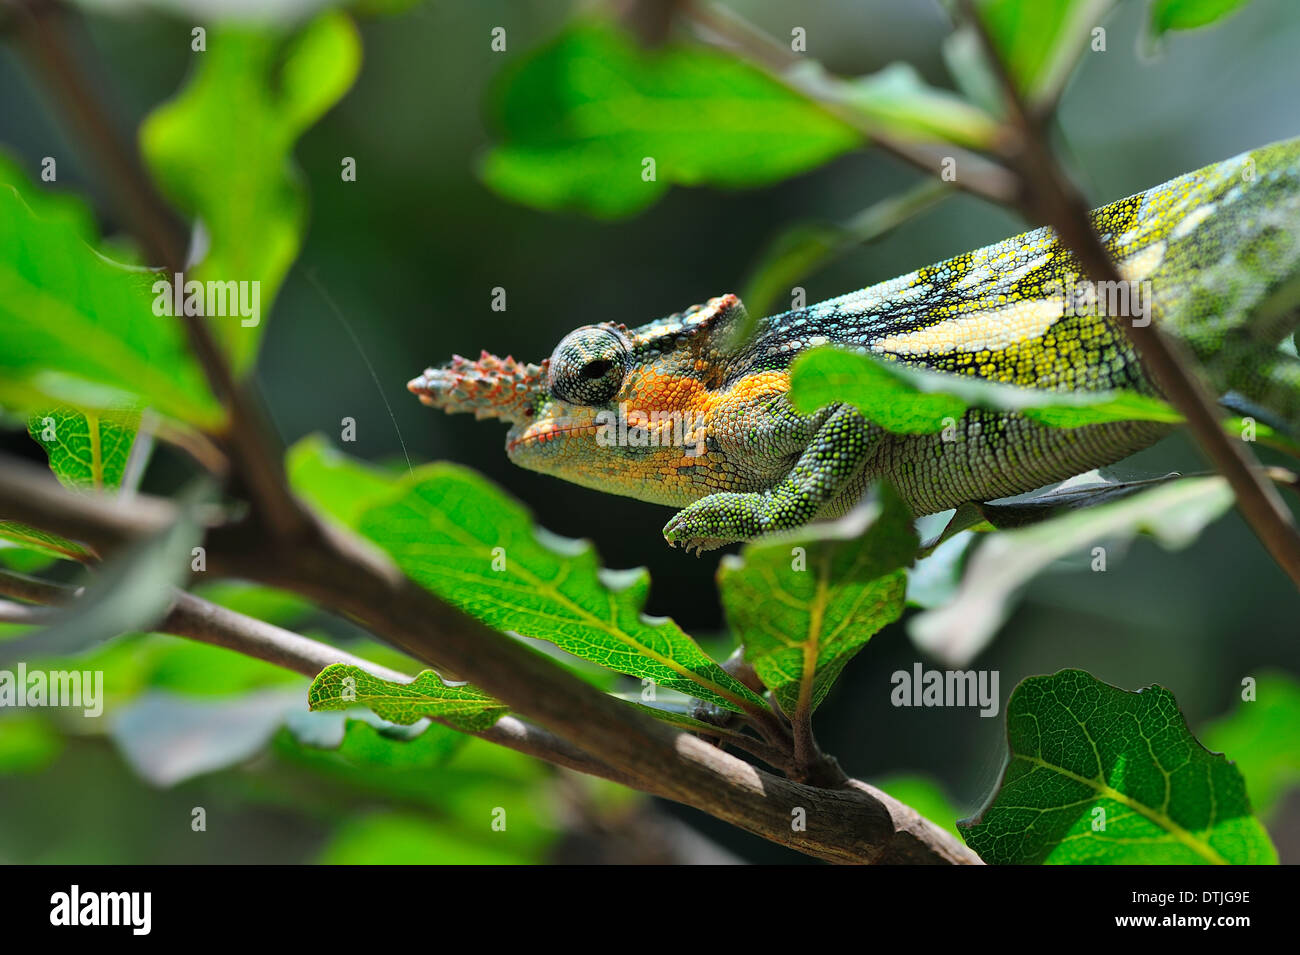 Two-horned chameleon stalking through foliage on the hunt for insects Stock Photo